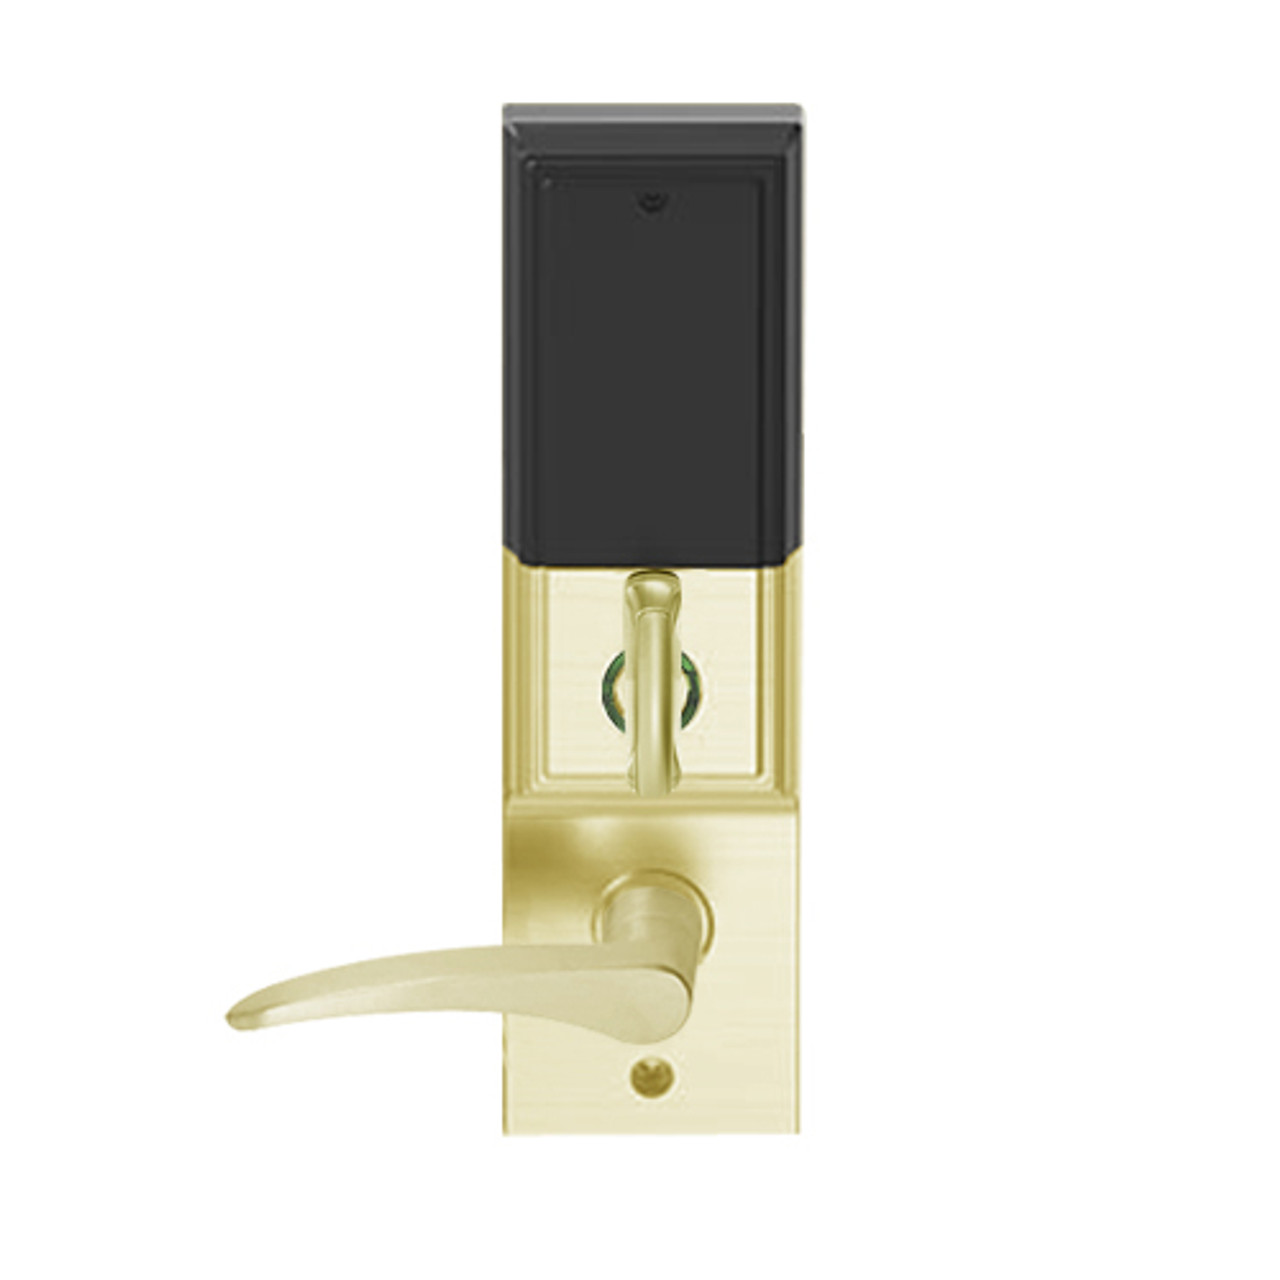 LEMD-ADD-BD-12-606-RH Schlage Privacy/Apartment Wireless Addison Mortise Deadbolt Lock with LED and 12 Lever Prepped for SFIC in Satin Brass